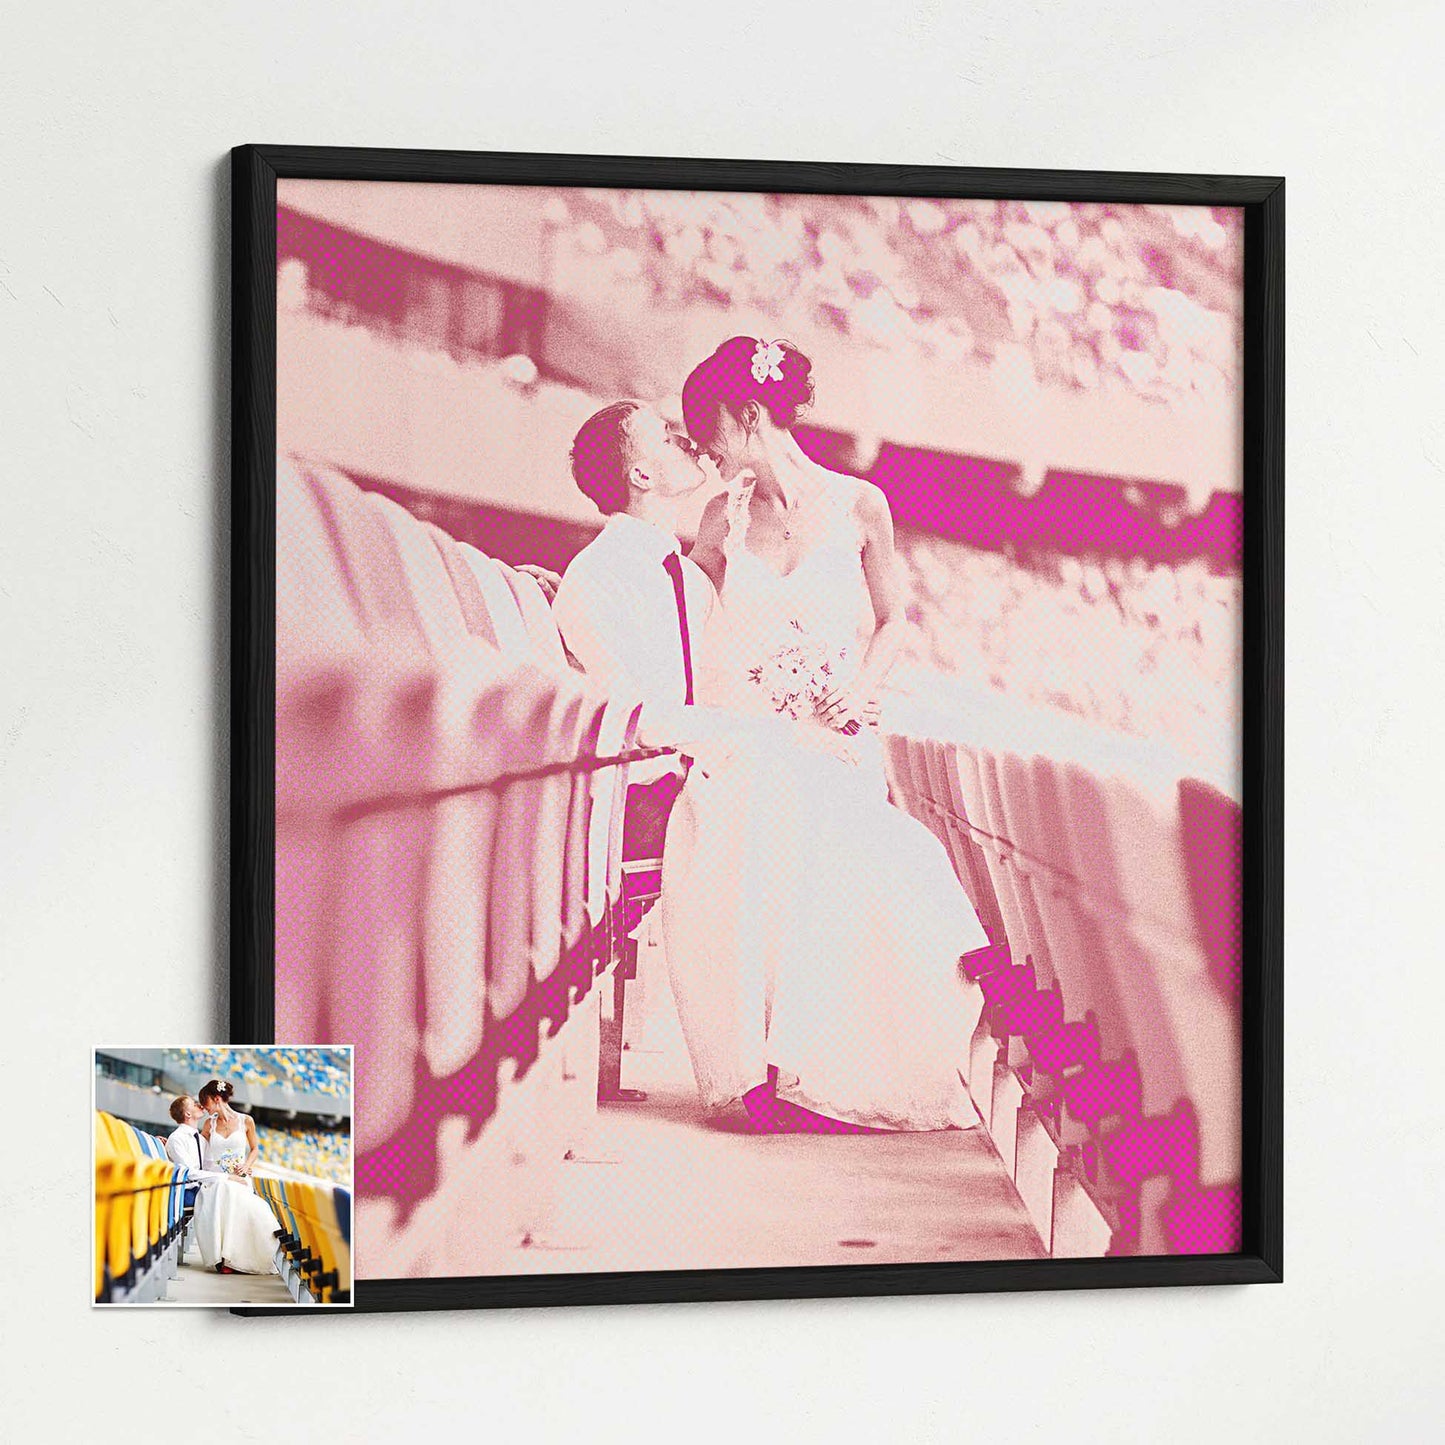 Bring the essence of pop art to your home decor with the Personalised Pink Pop Art Framed Print. Its halftone effect and vibrant colors create a cool and lively vibe, instantly adding excitement and happiness to any space